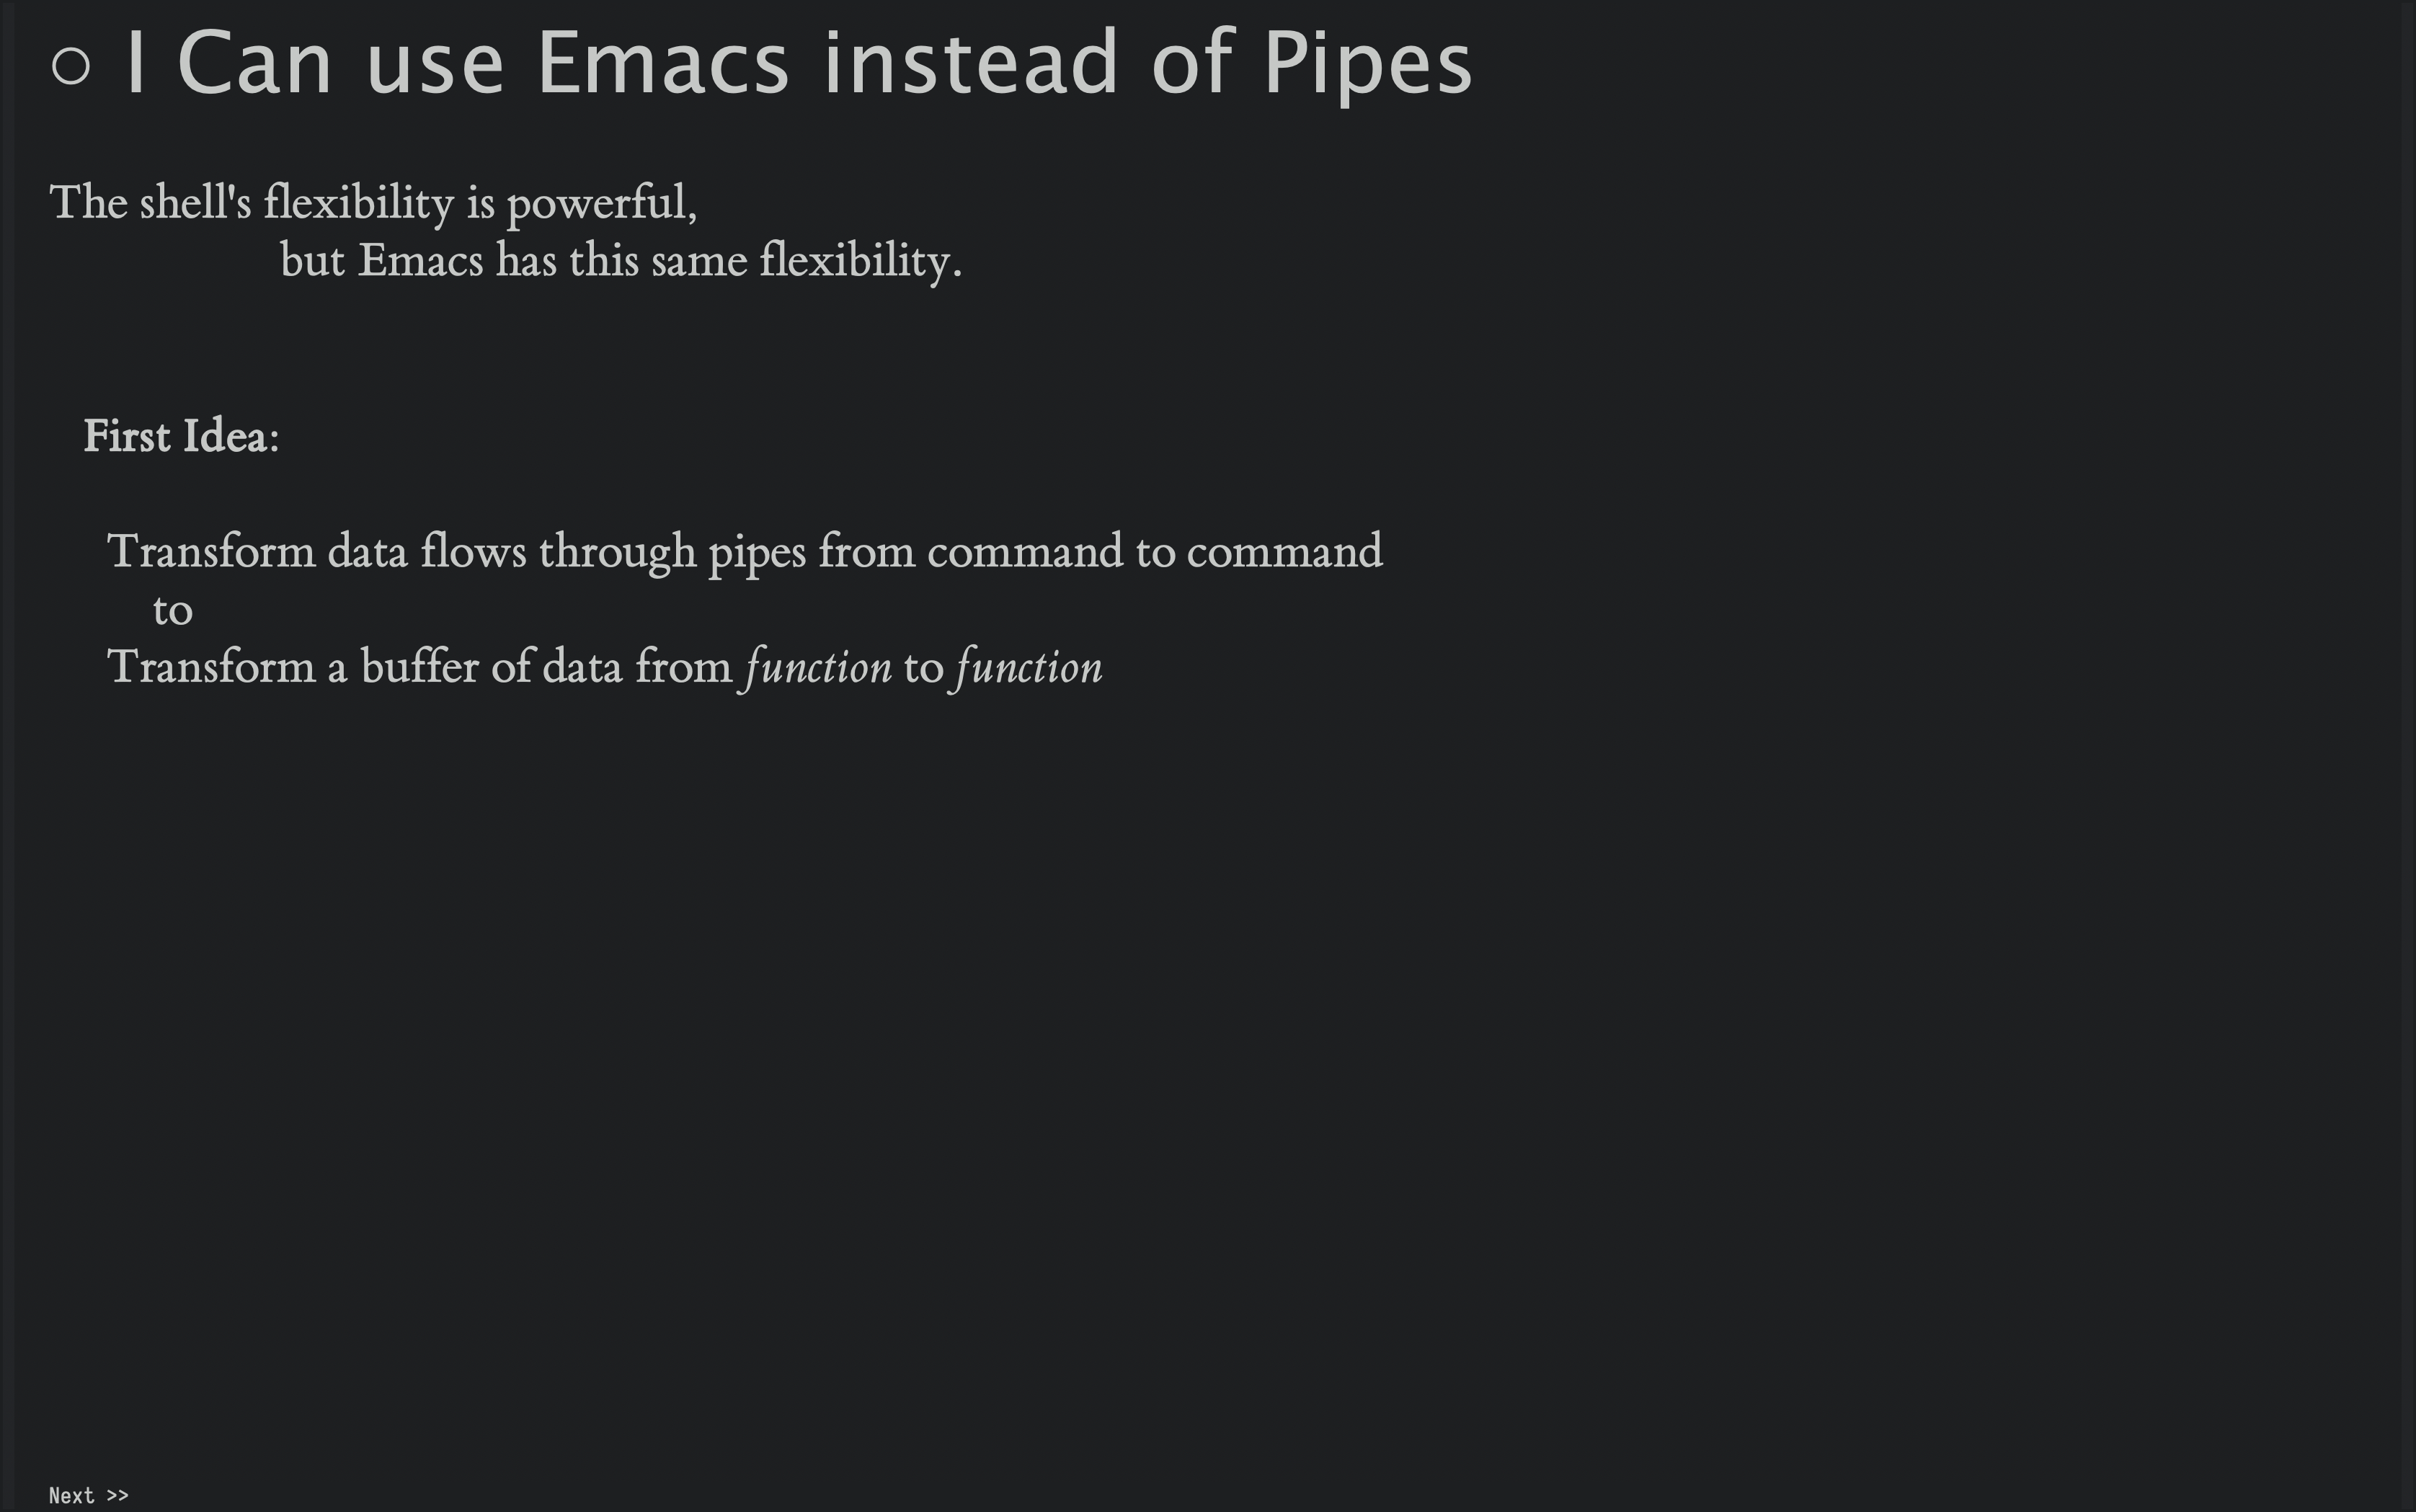 I could just use Emacs for all of it.